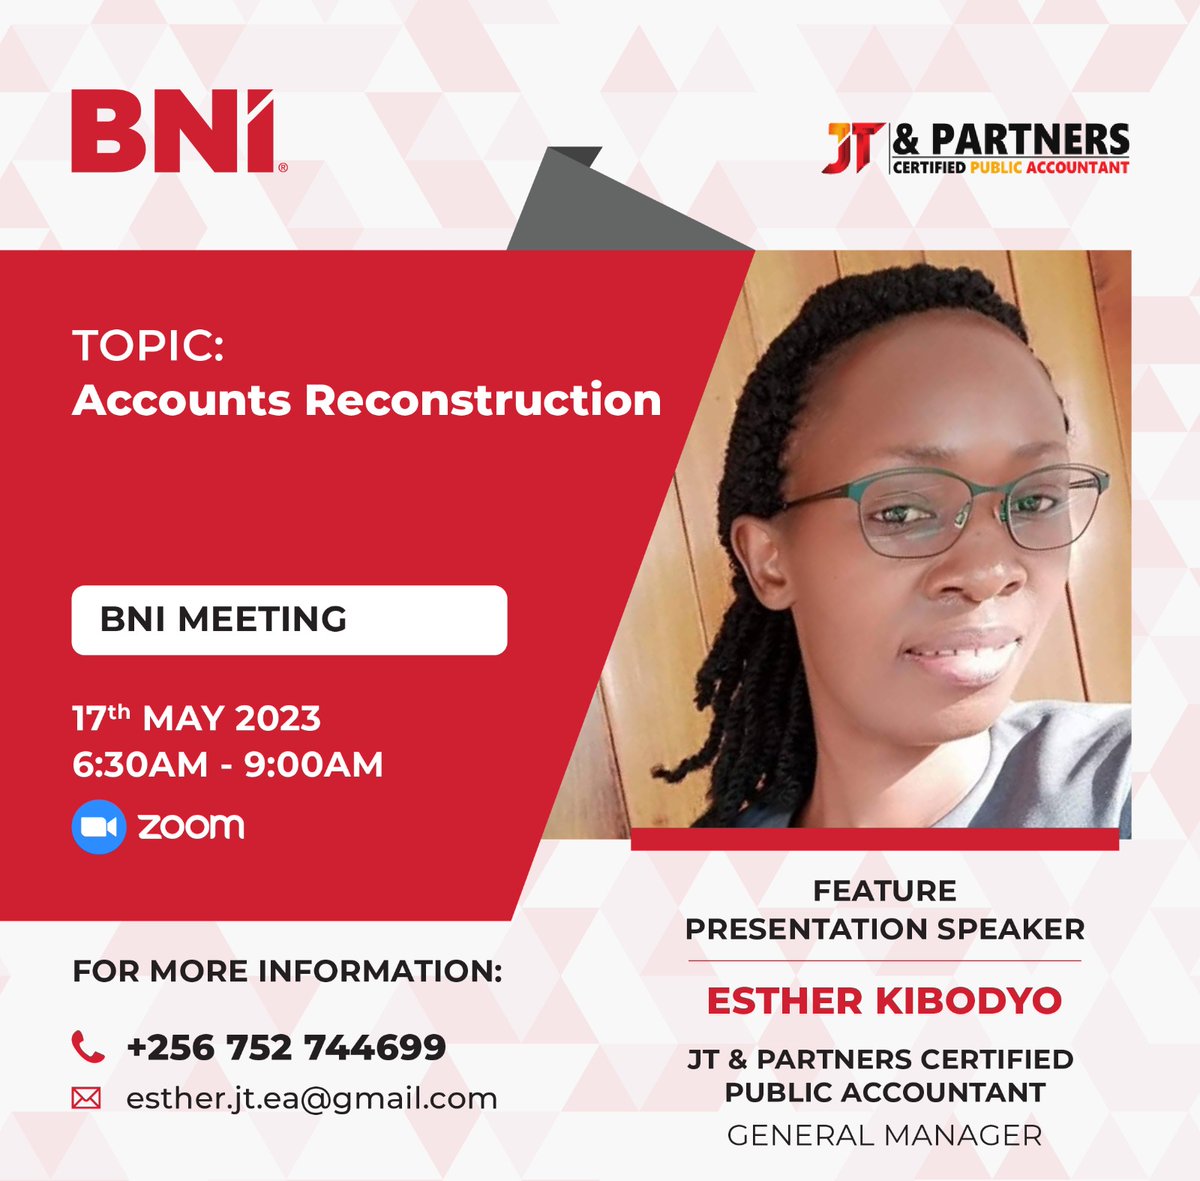 This week at BNI, join ESTHER KIBODYO as she presents on Accounts reconstruction. #bnireferralsatwork, #bnireferralsource, #bnireferralsinmotion